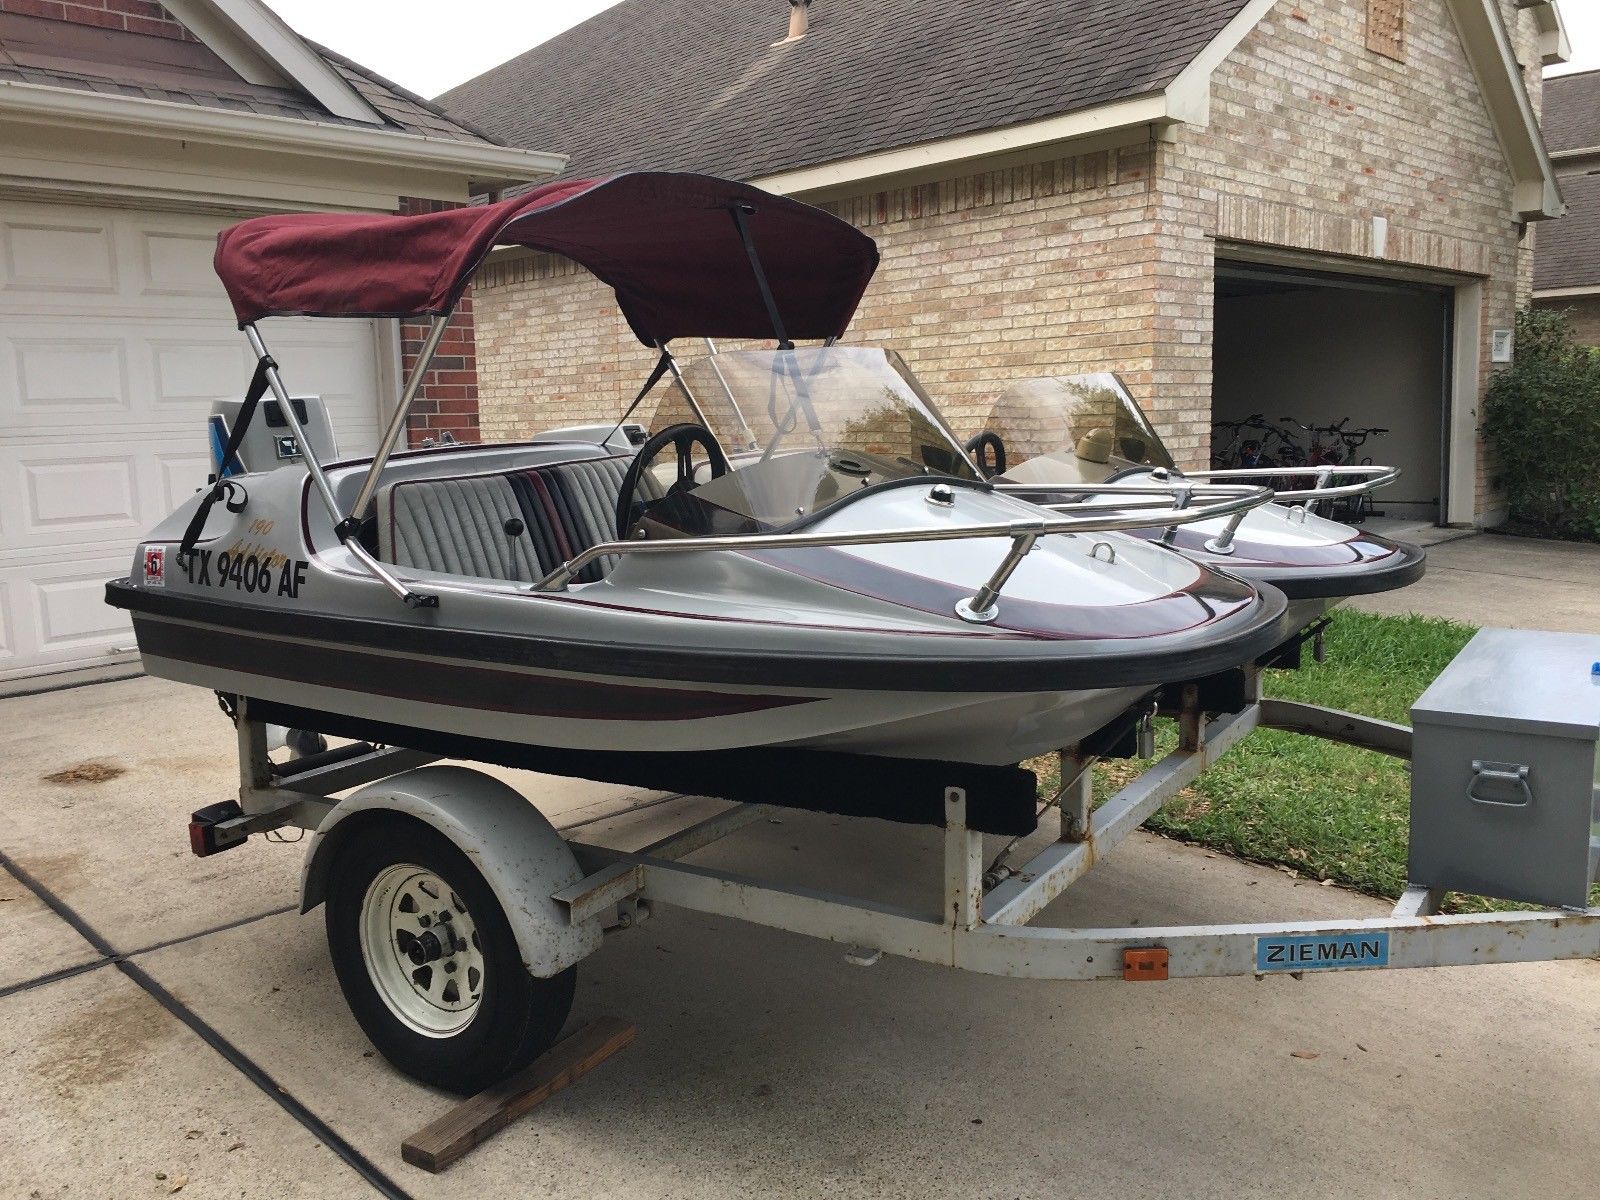 mini speed boats, original owner, garage stored, two boats and zeiman trail...